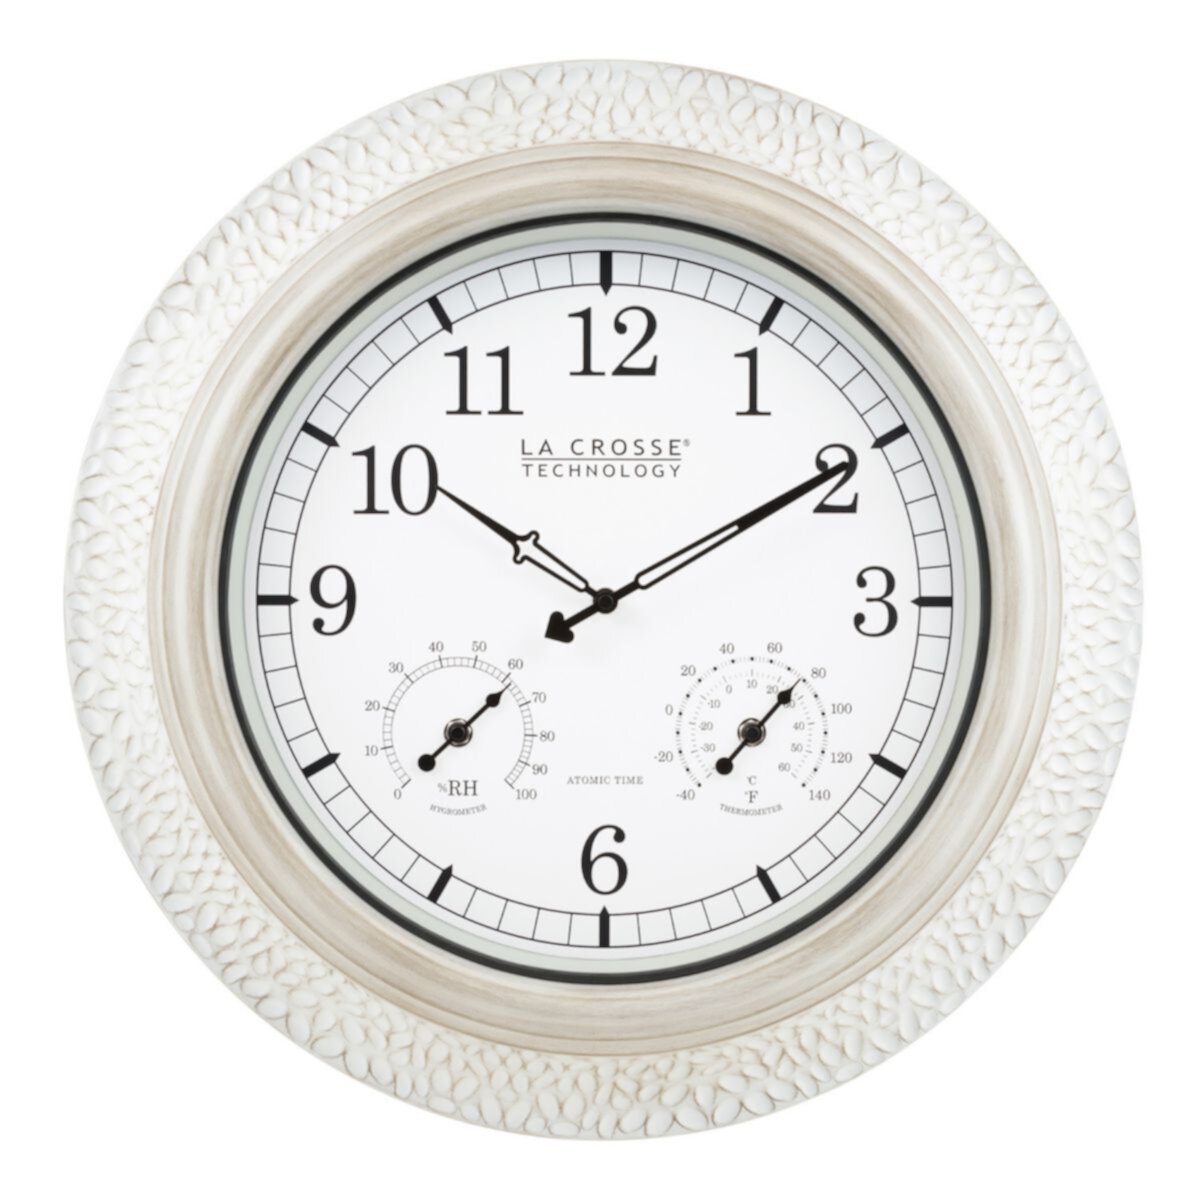 La Crosse Technology 21-in. Indoor/Outdoor Atomic Whitewashed Hammered Metal Wall Clock with Temperature La Crosse Technology